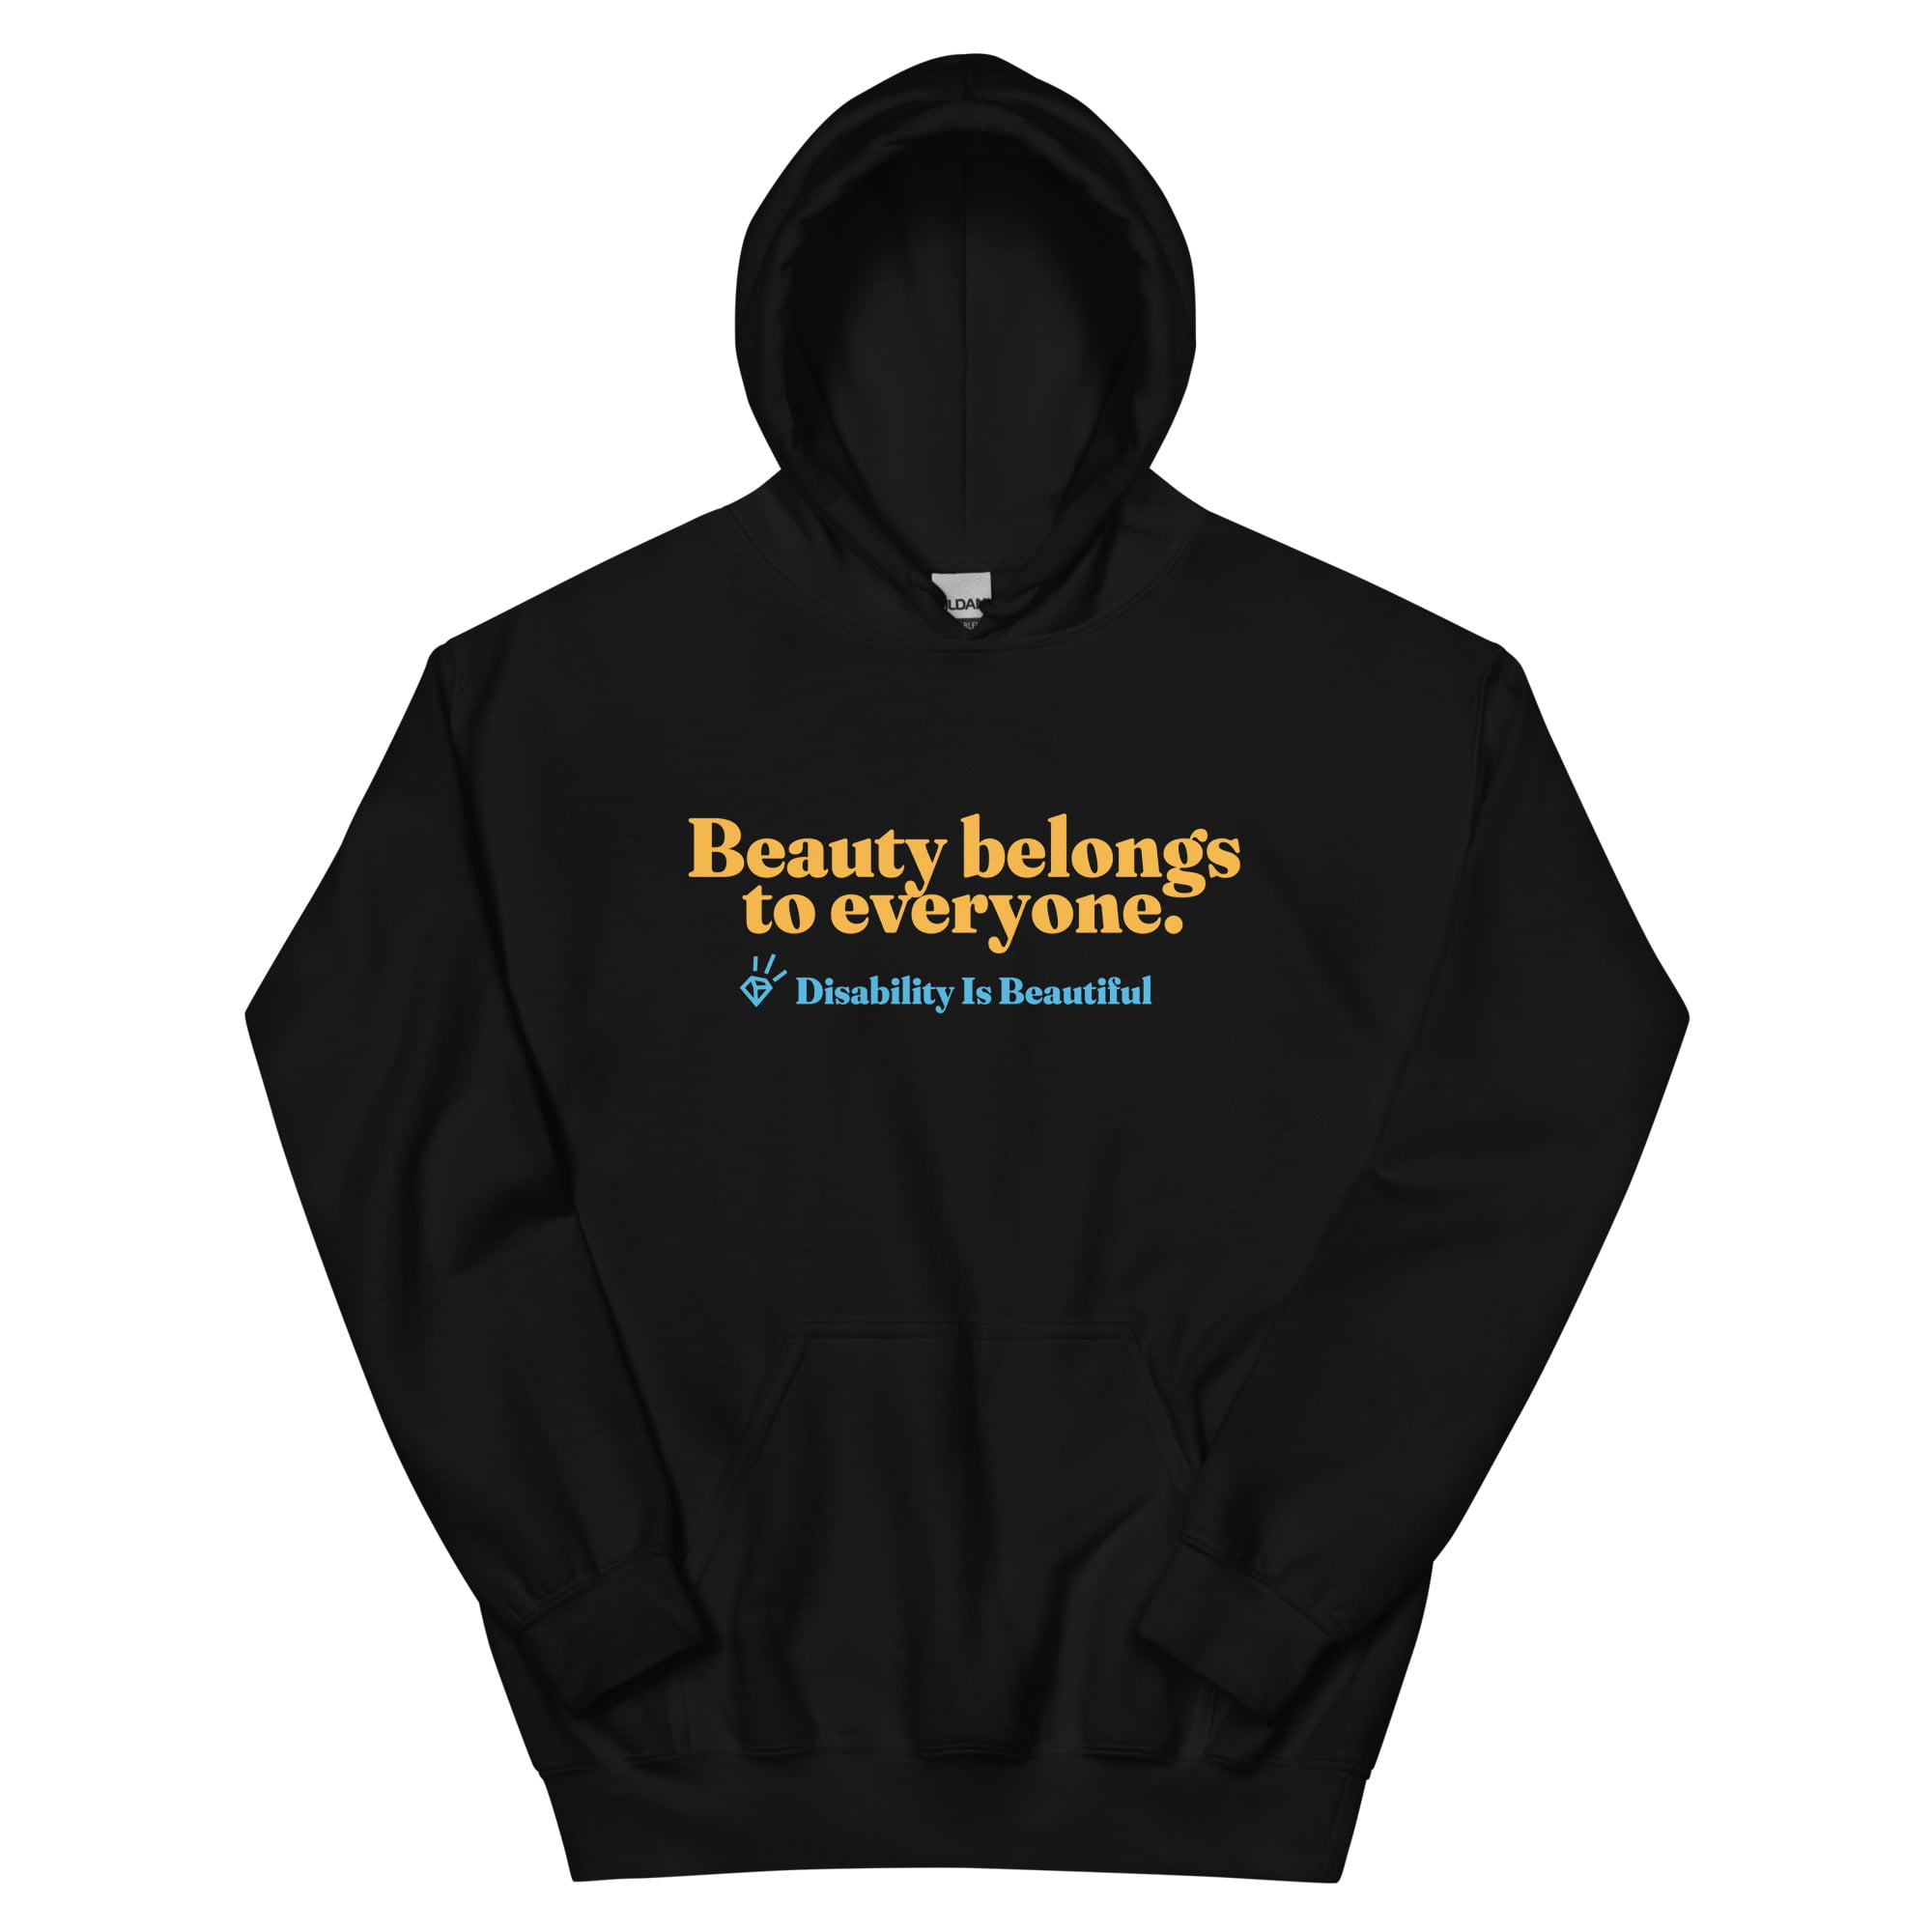 Product image for Disability is Beautiful Unisex Hoodie